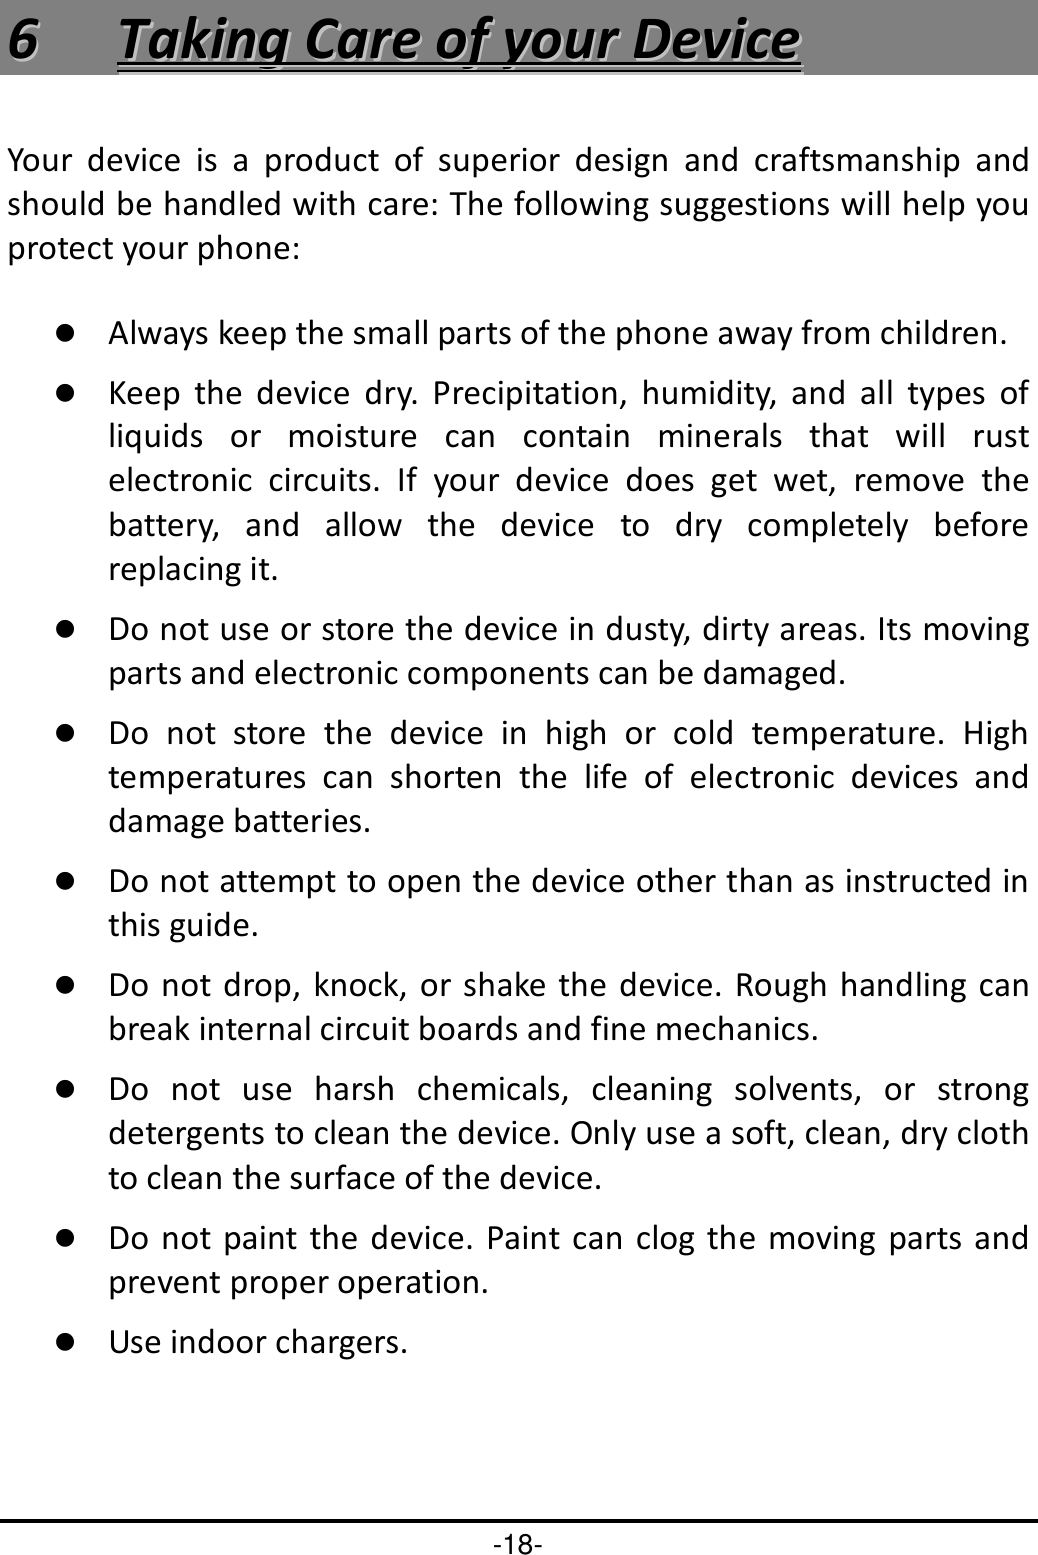 -18- 66  TTaakkiinngg  CCaarree  ooff  yyoouurr  DDeevviiccee  Your  device  is  a  product  of  superior  design  and  craftsmanship  and should be handled with care: The following suggestions will help you protect your phone:    Always keep the small parts of the phone away from children.    Keep  the  device  dry.  Precipitation,  humidity,  and  all  types  of liquids  or  moisture  can  contain  minerals  that  will  rust electronic  circuits.  If  your  device  does  get  wet,  remove  the battery,  and  allow  the  device  to  dry  completely  before replacing it.    Do not use or store the device in dusty, dirty areas. Its moving parts and electronic components can be damaged.  Do  not  store  the  device  in  high  or  cold  temperature.  High temperatures  can  shorten  the  life  of  electronic  devices  and damage batteries.  Do not attempt to open the device other than as instructed in this guide.  Do not drop,  knock, or shake the device. Rough handling can break internal circuit boards and fine mechanics.    Do  not  use  harsh  chemicals,  cleaning  solvents,  or  strong detergents to clean the device. Only use a soft, clean, dry cloth to clean the surface of the device.  Do not paint the  device. Paint can clog the  moving  parts and prevent proper operation.    Use indoor chargers.   